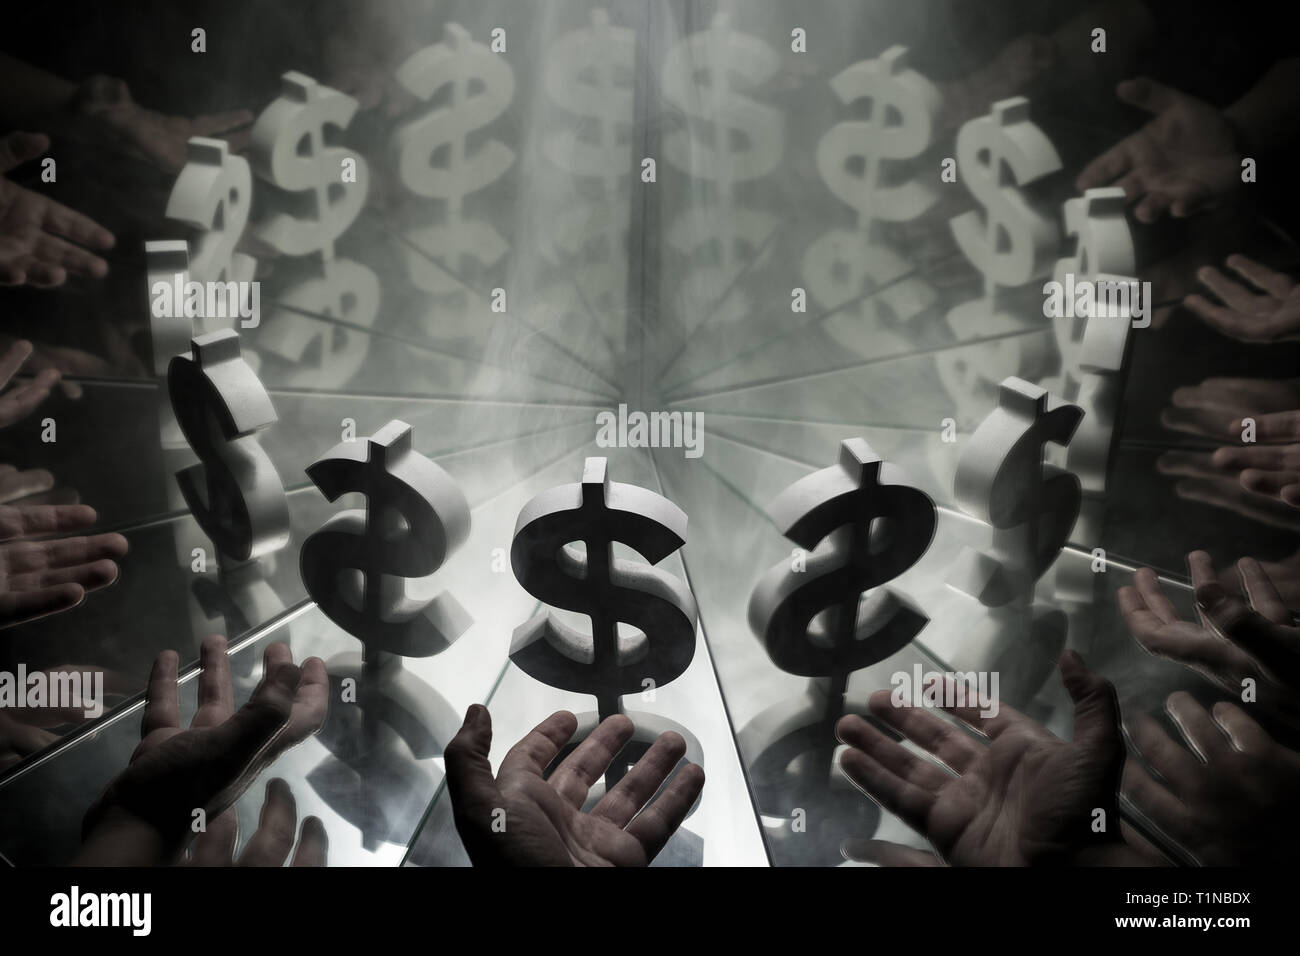 Hands Reaching for US Dollar Currency Symbol on Mirror Covered In Smoke With many Reflections of Itself Stock Photo